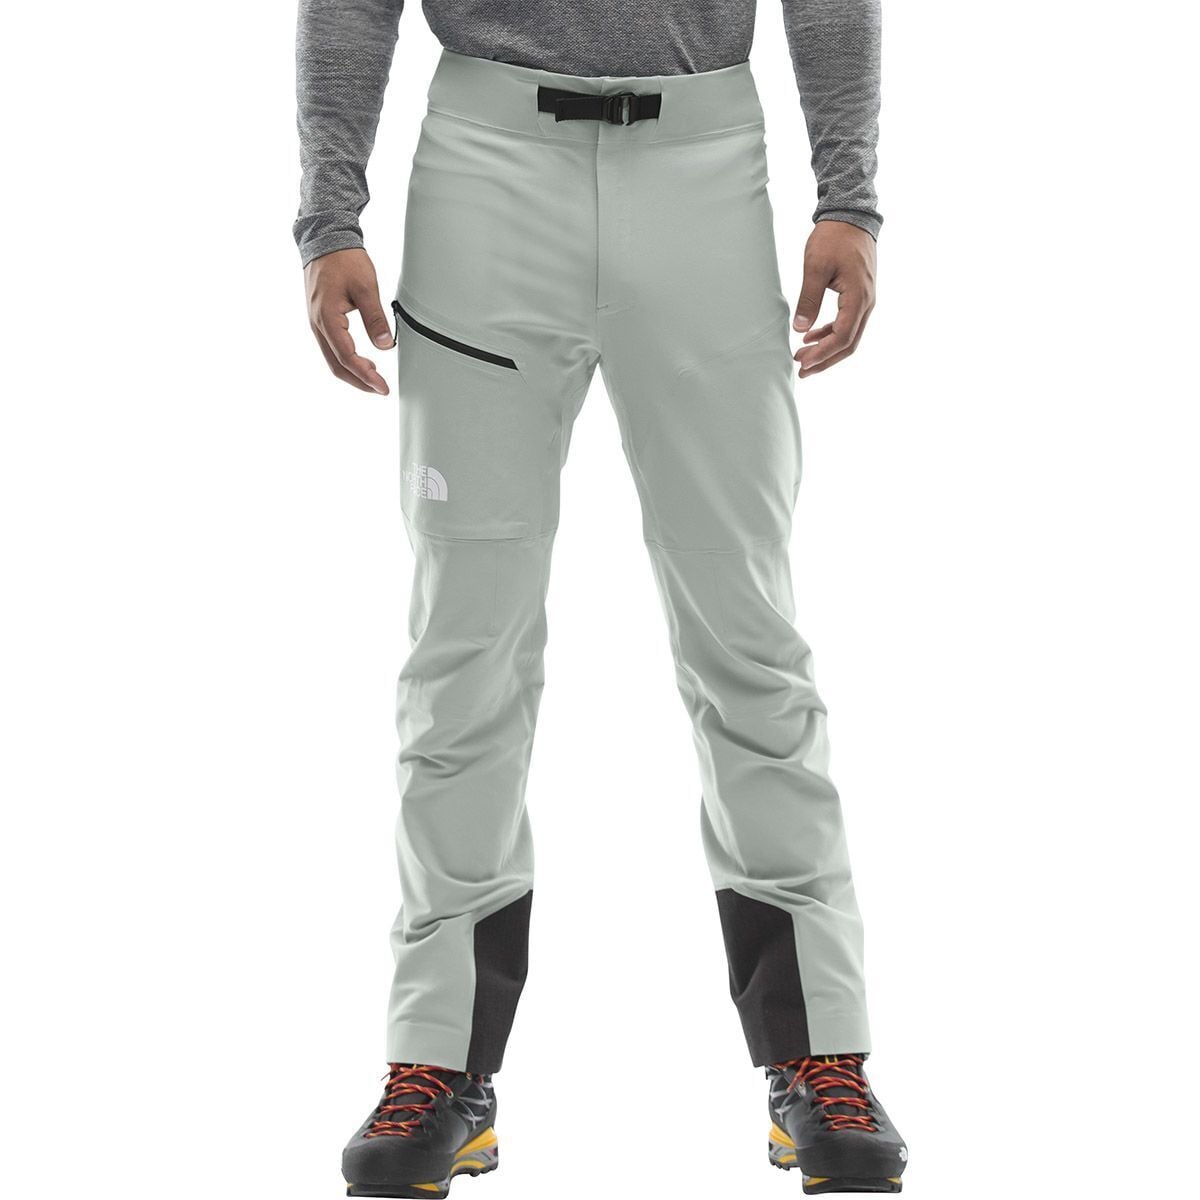 north face softshell trousers